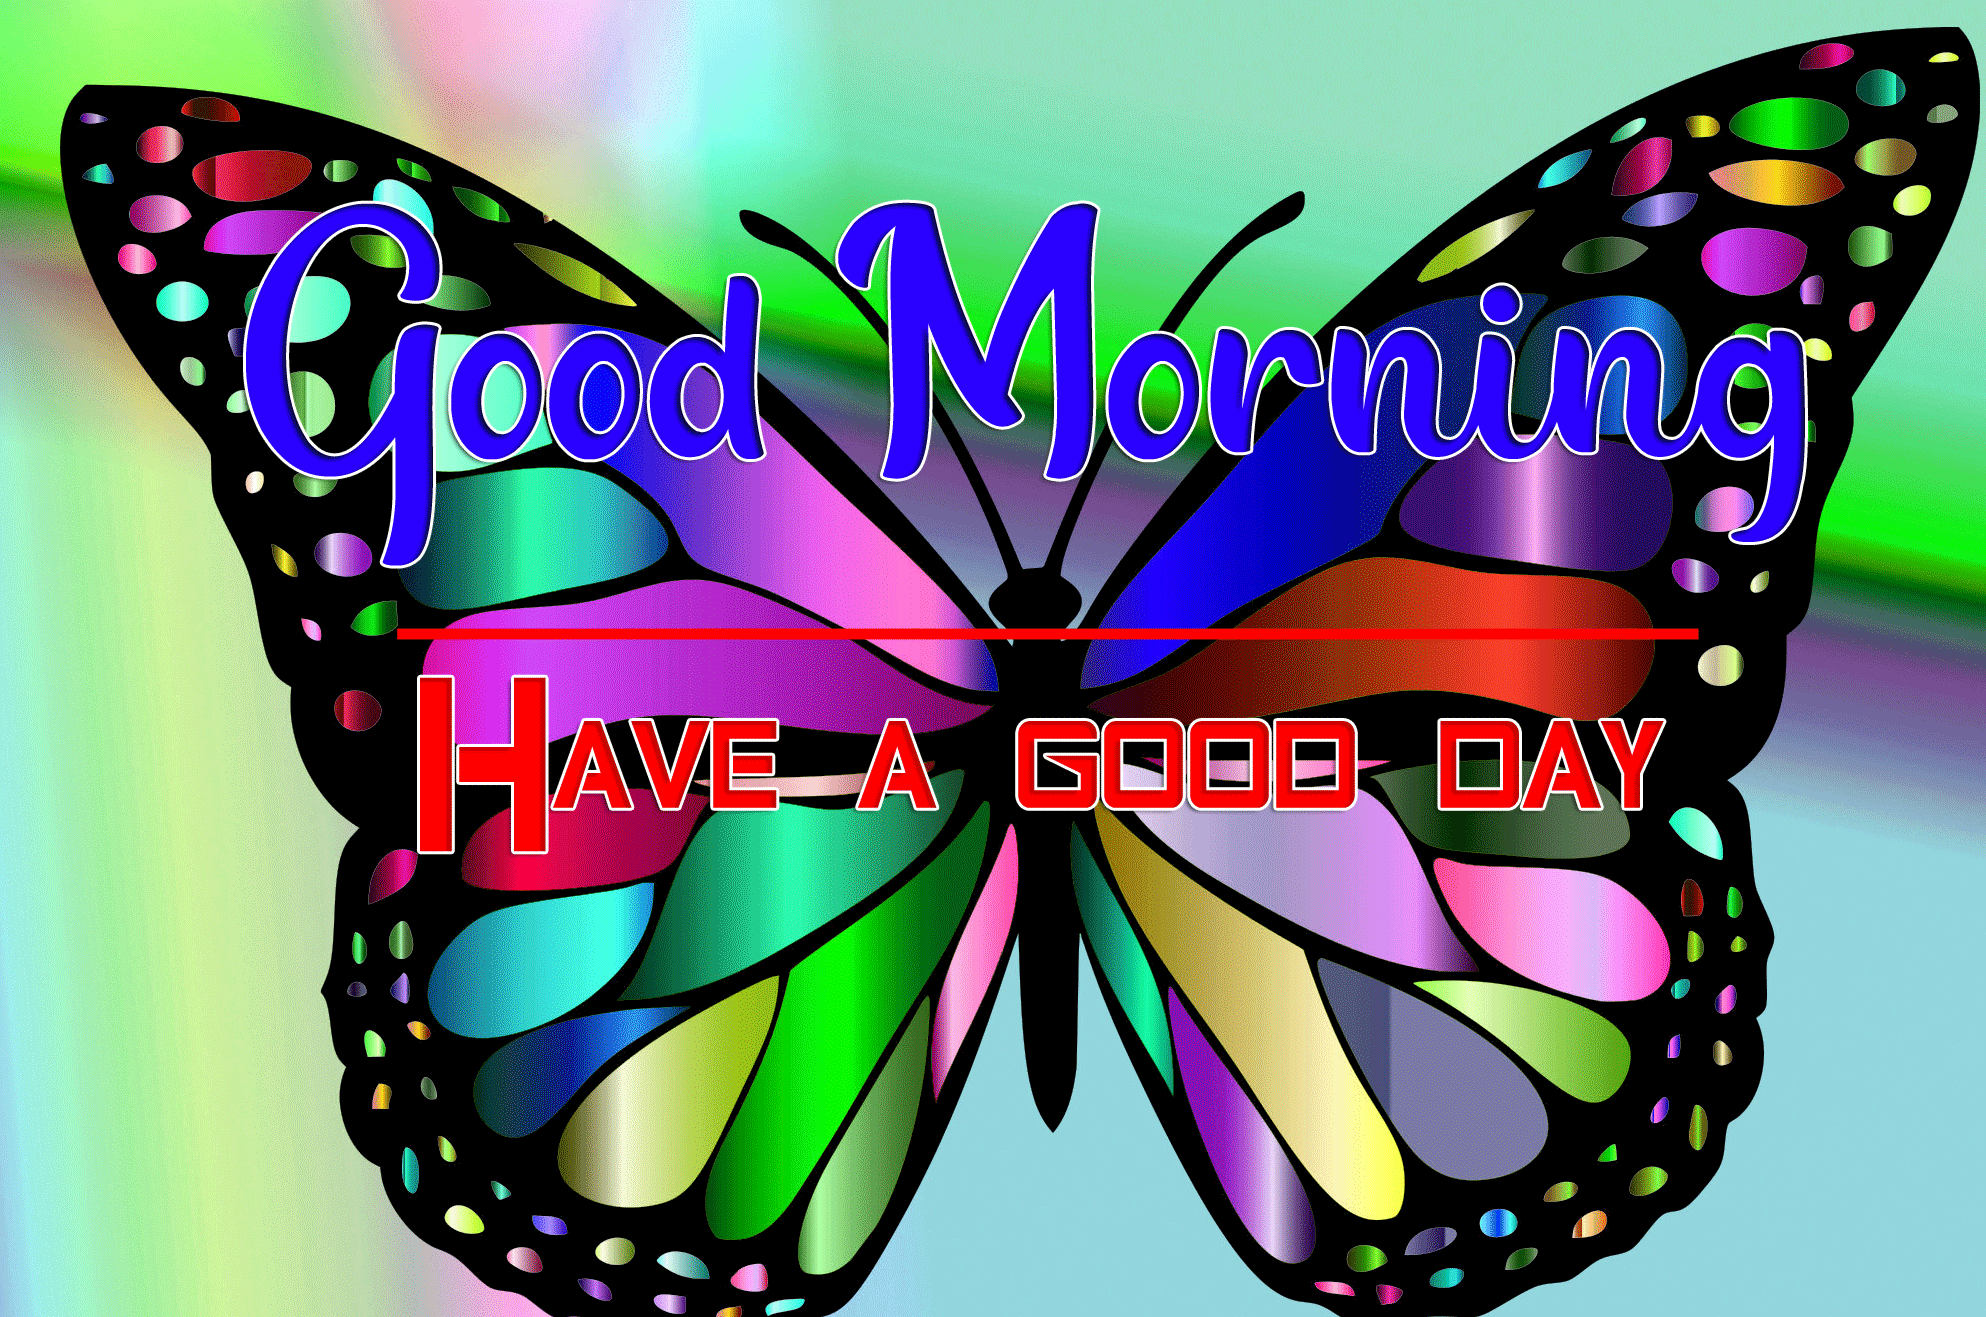 Good Morning Wishes Images HD 1080p 6